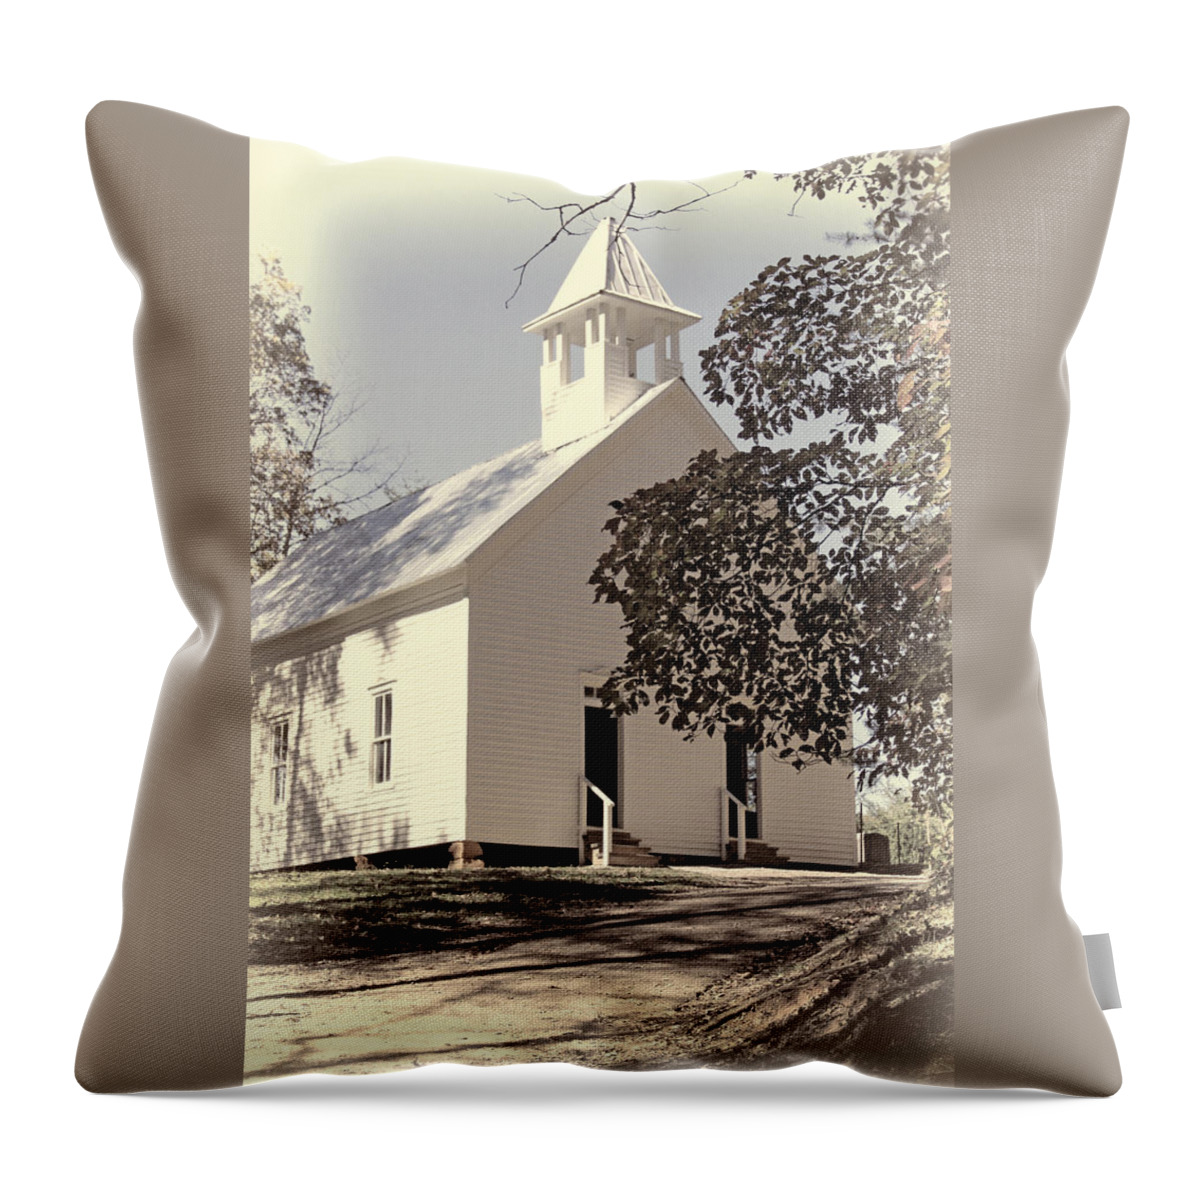 Cades Cove Methodist Church Throw Pillow featuring the photograph The Methodist Church Of Cades Cove by HH Photography of Florida